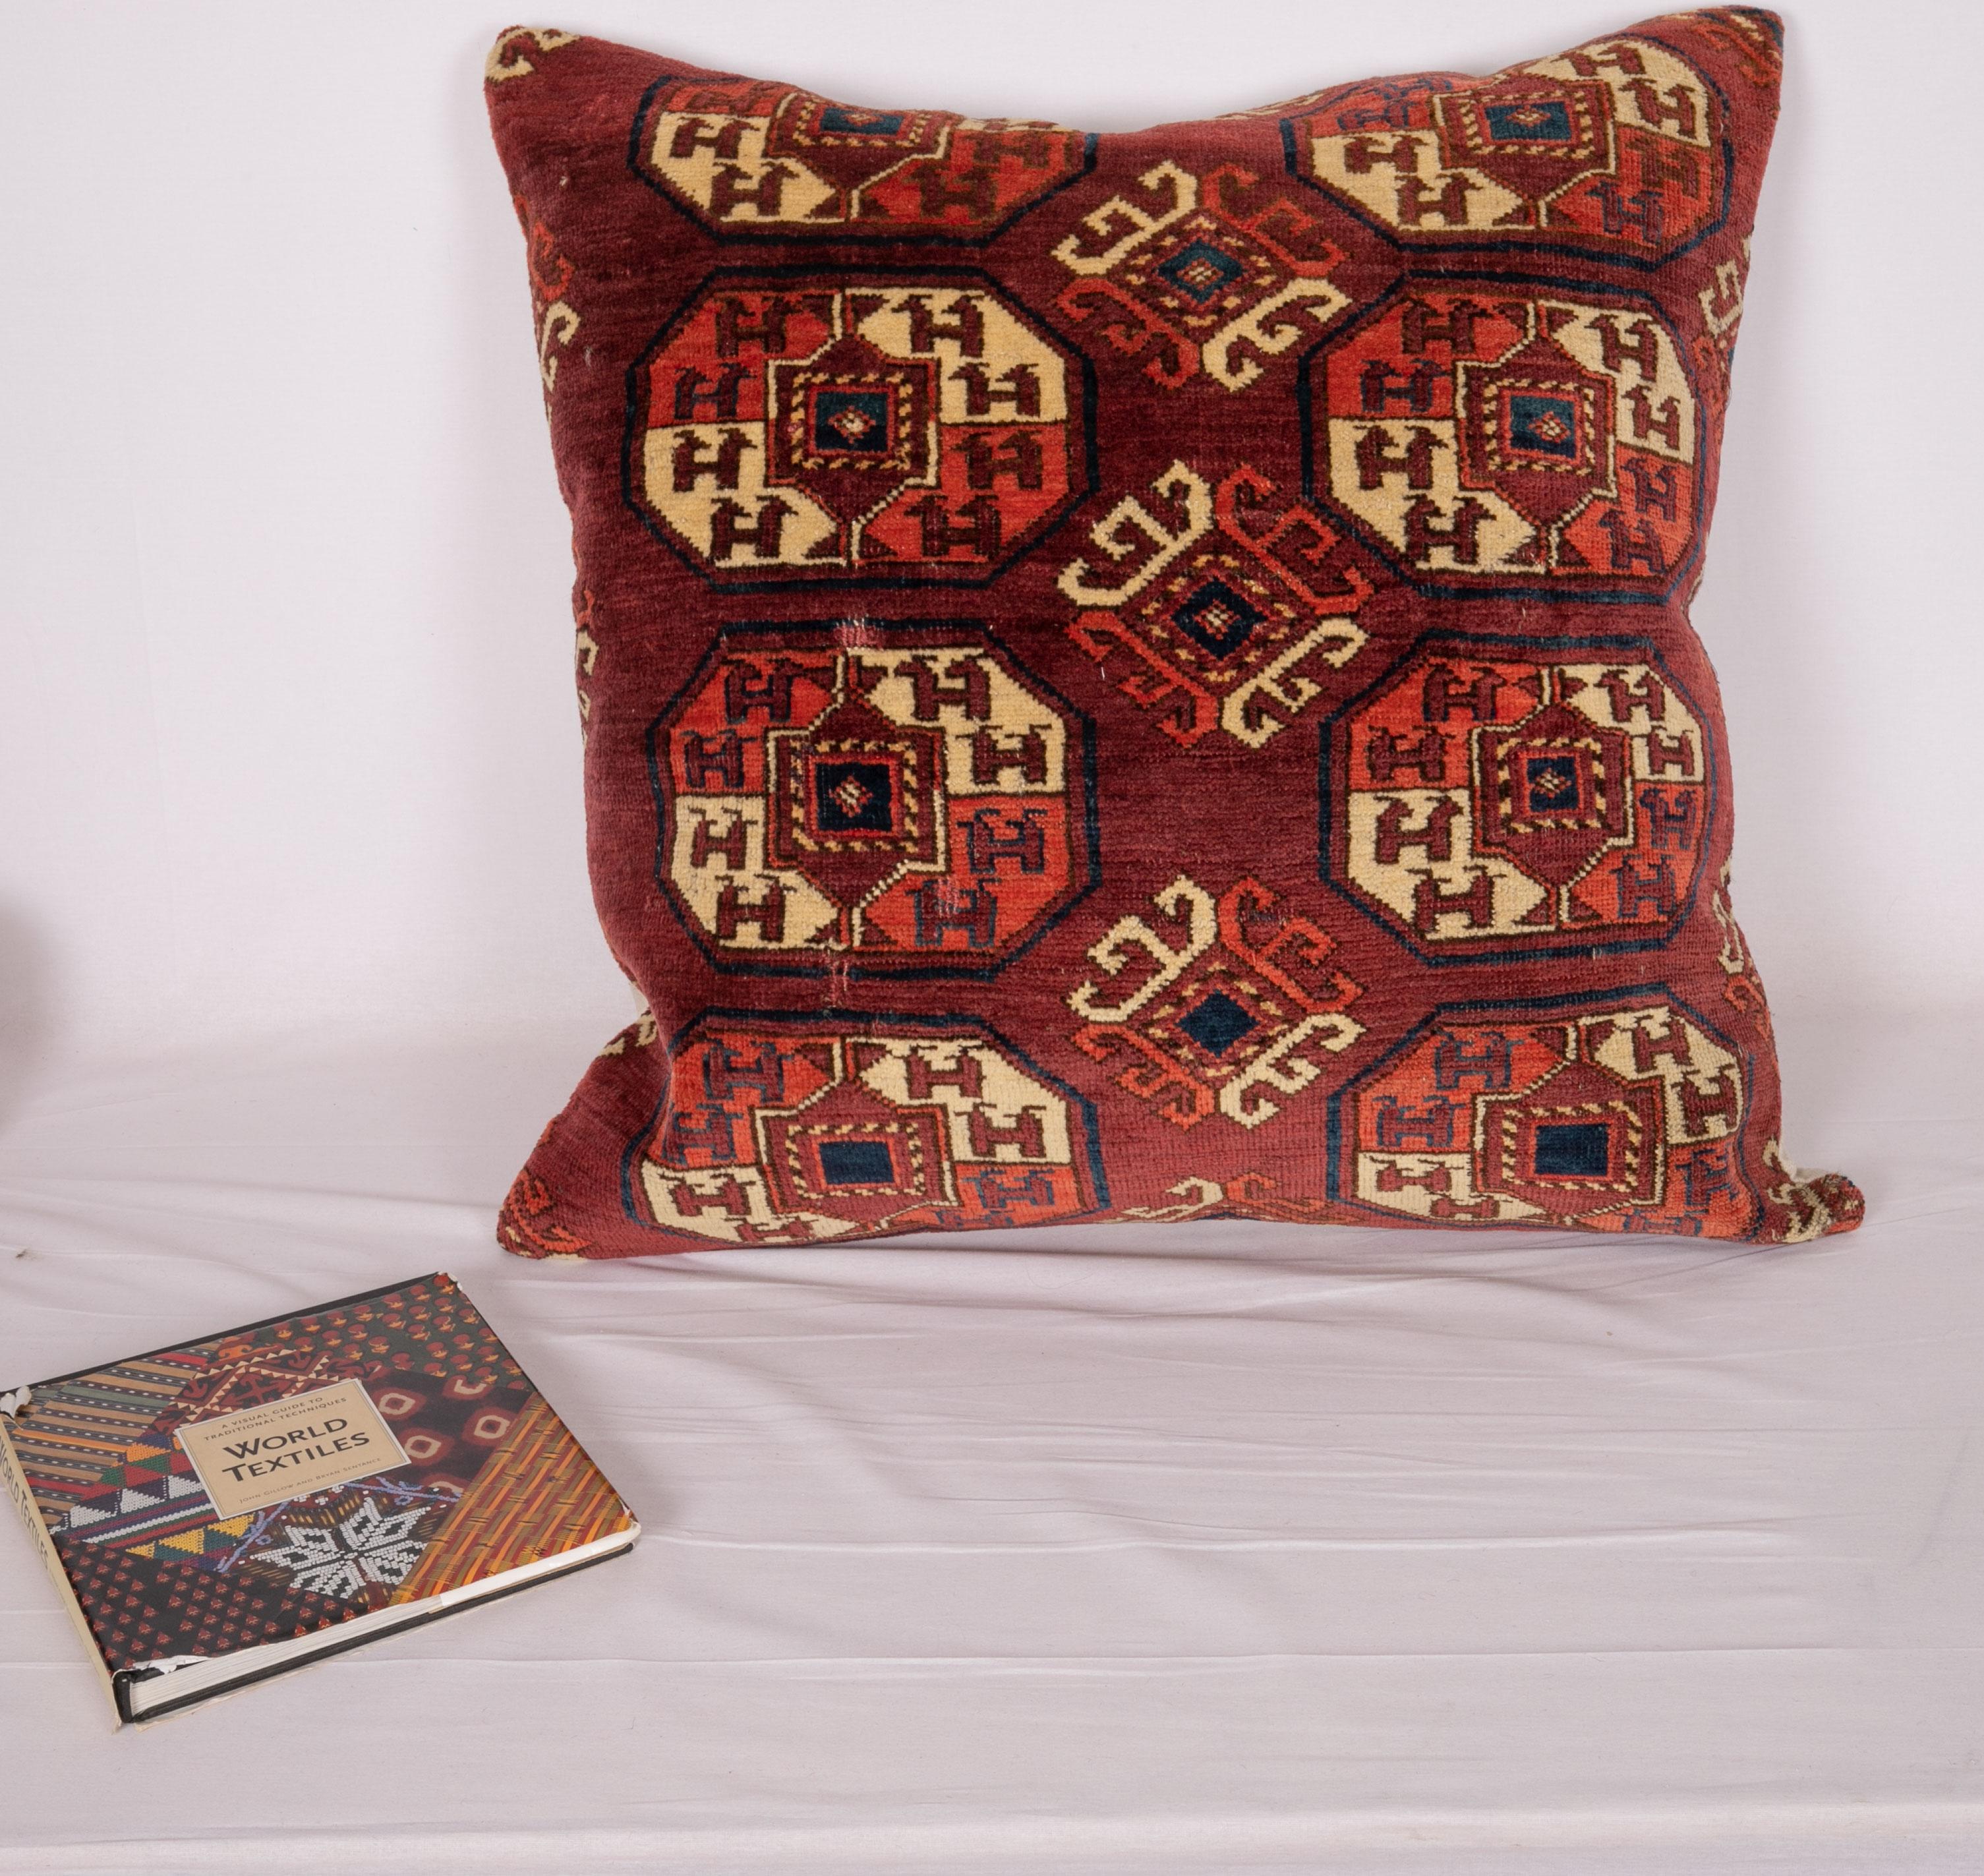 Tribal Antique Turkmen Large Rug Pillow Case Made from a 19th Century Turkmen Main Rug